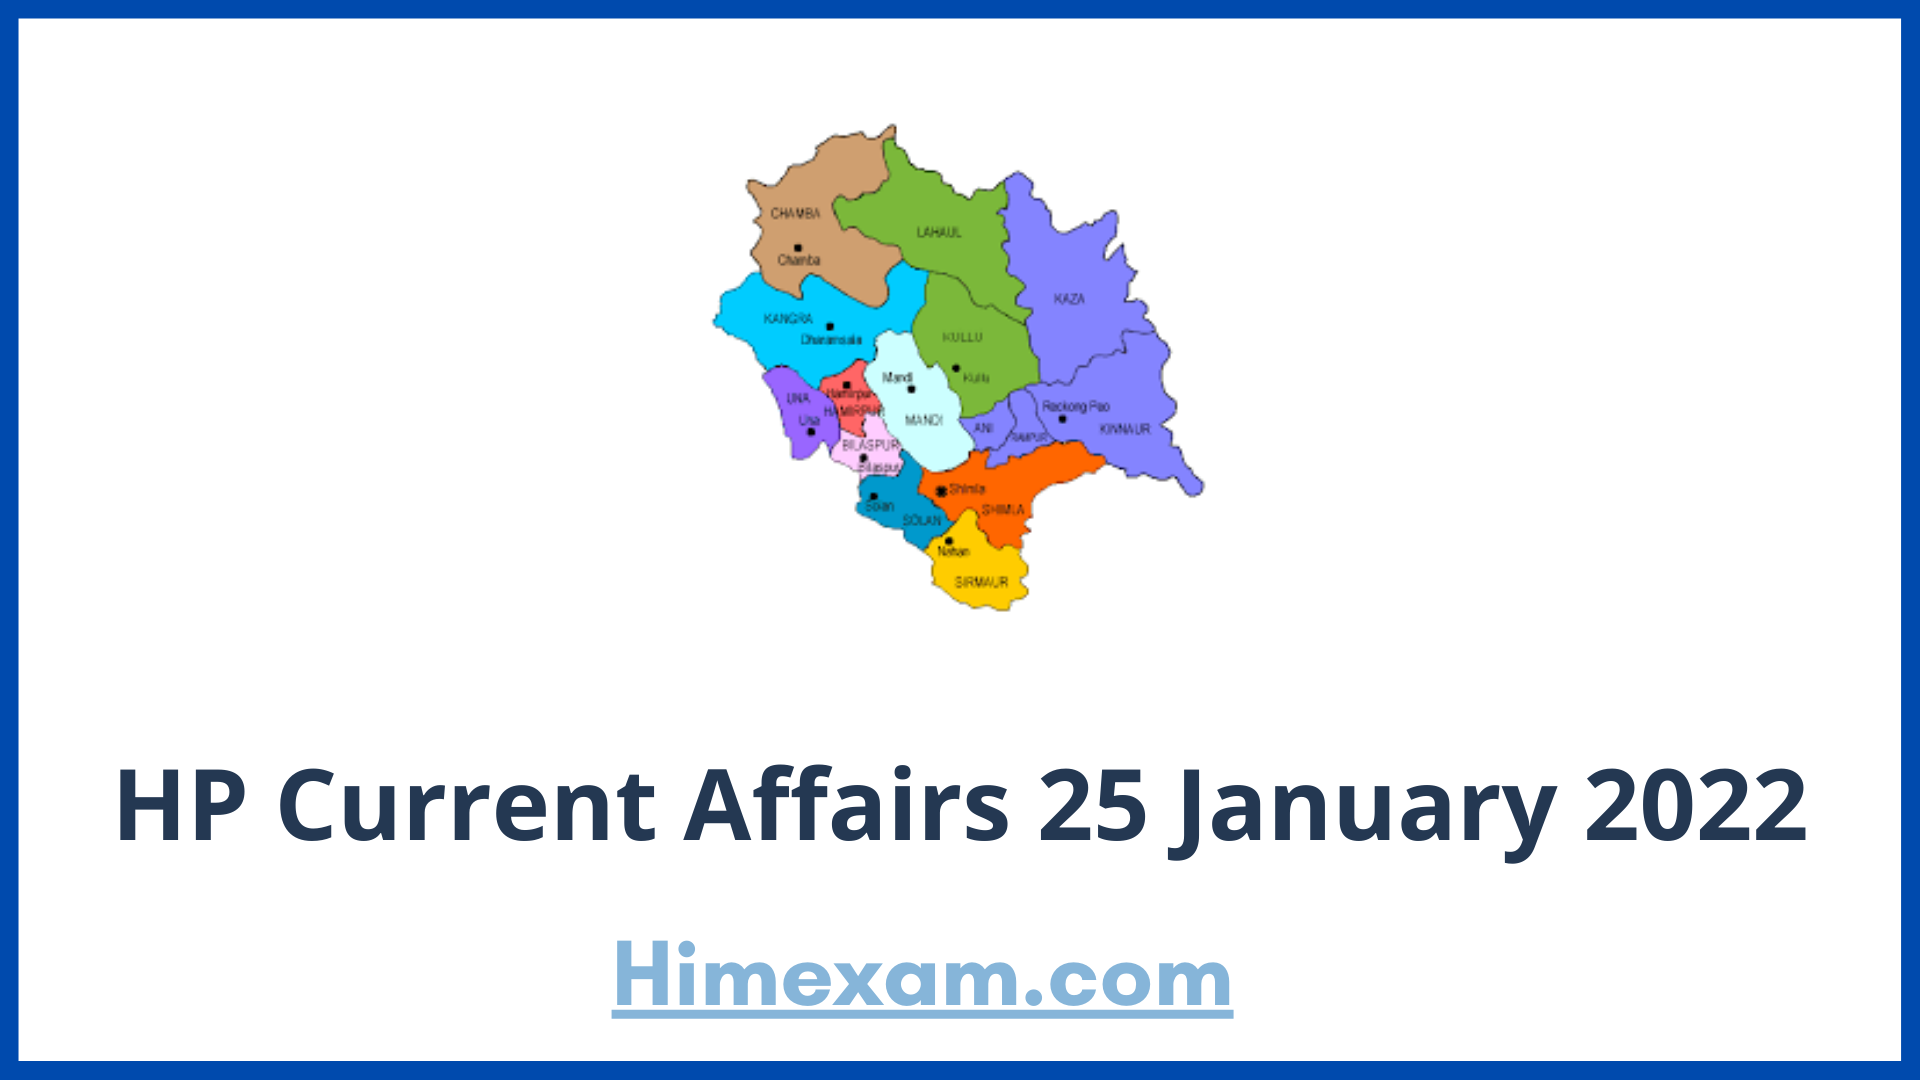 HP Current Affairs 25 January 2022